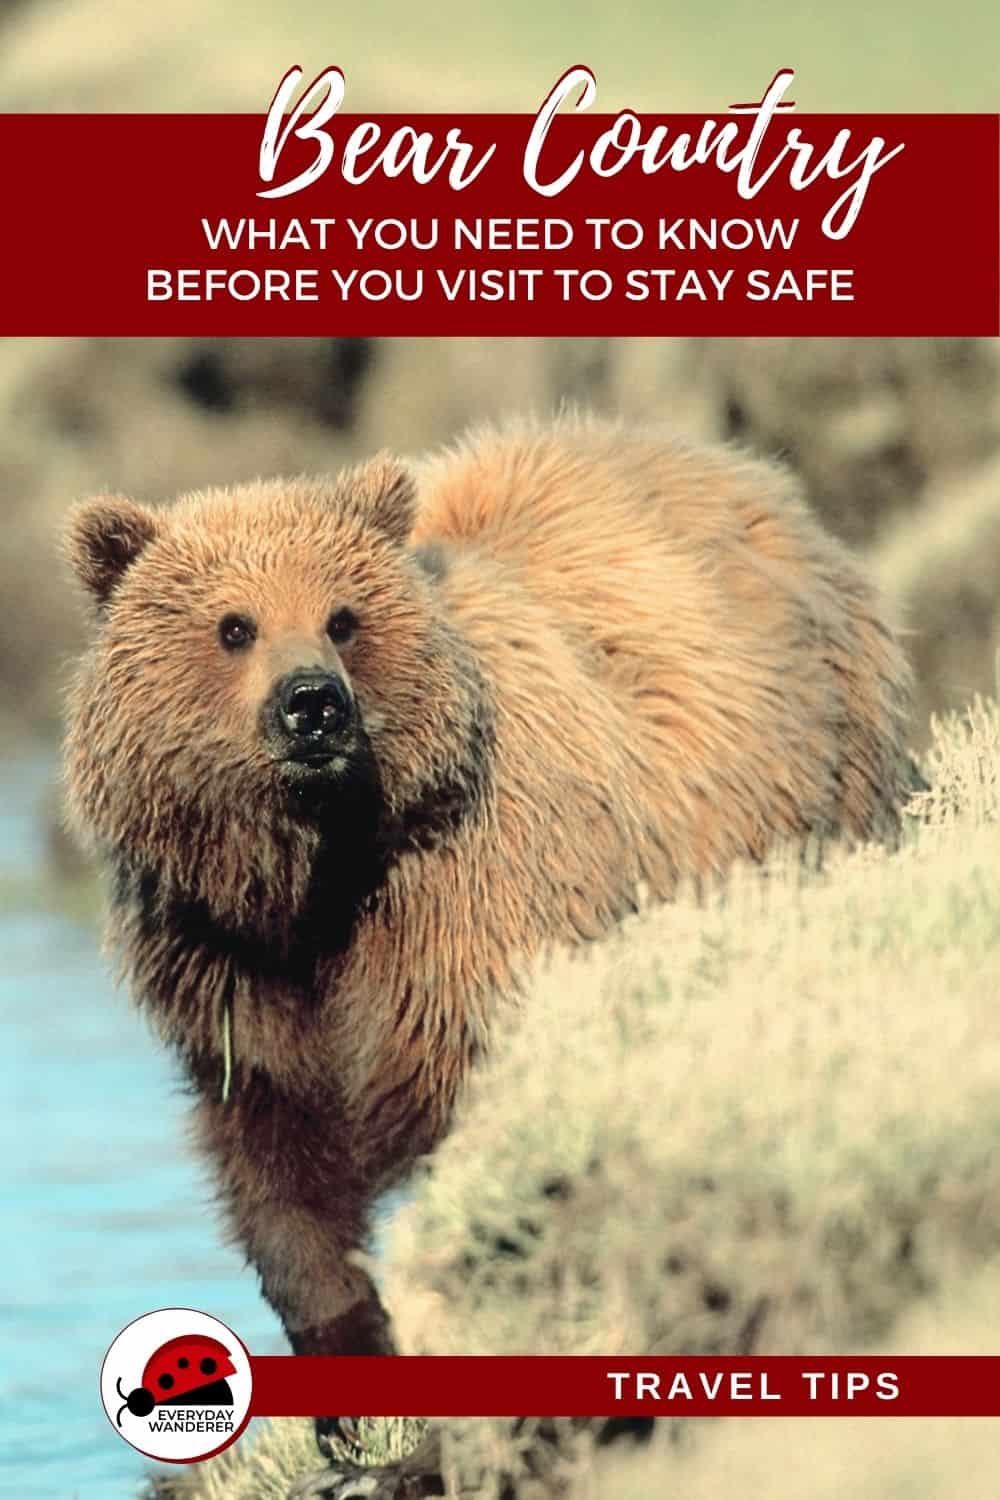 What to do if you see a bear: How to stay safe